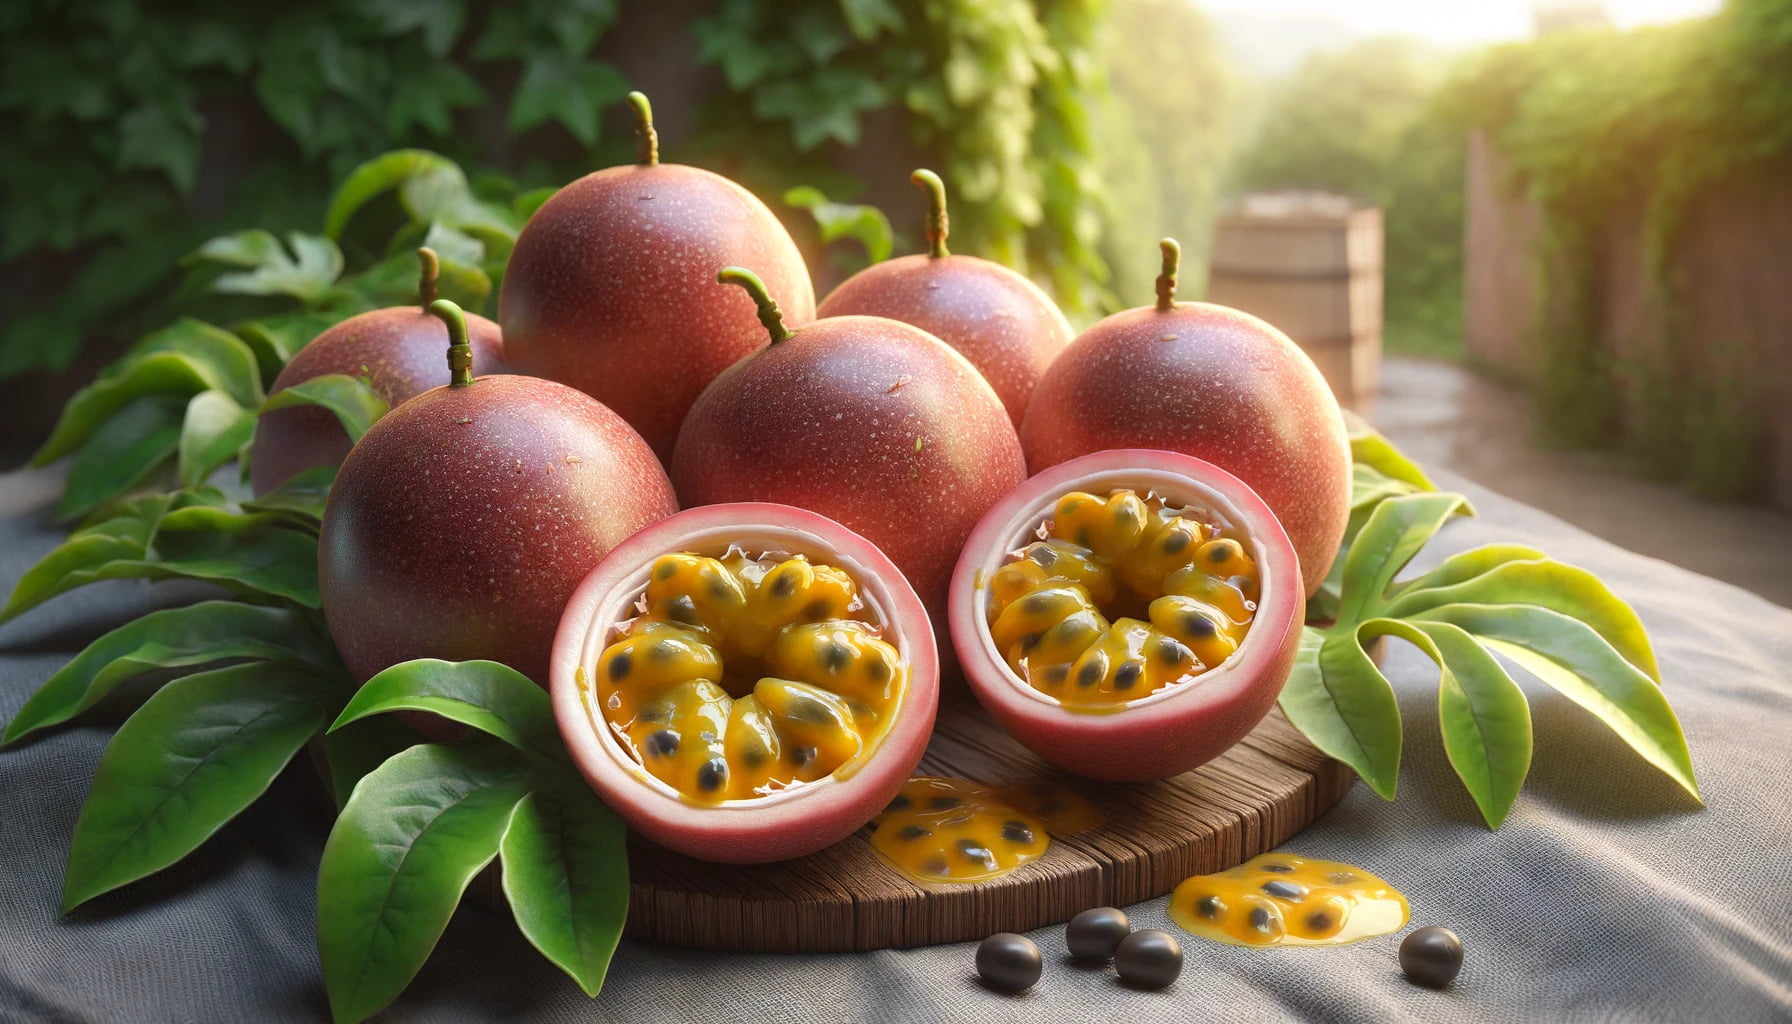  A photorealistic image of passionfruit in a landscape format. 